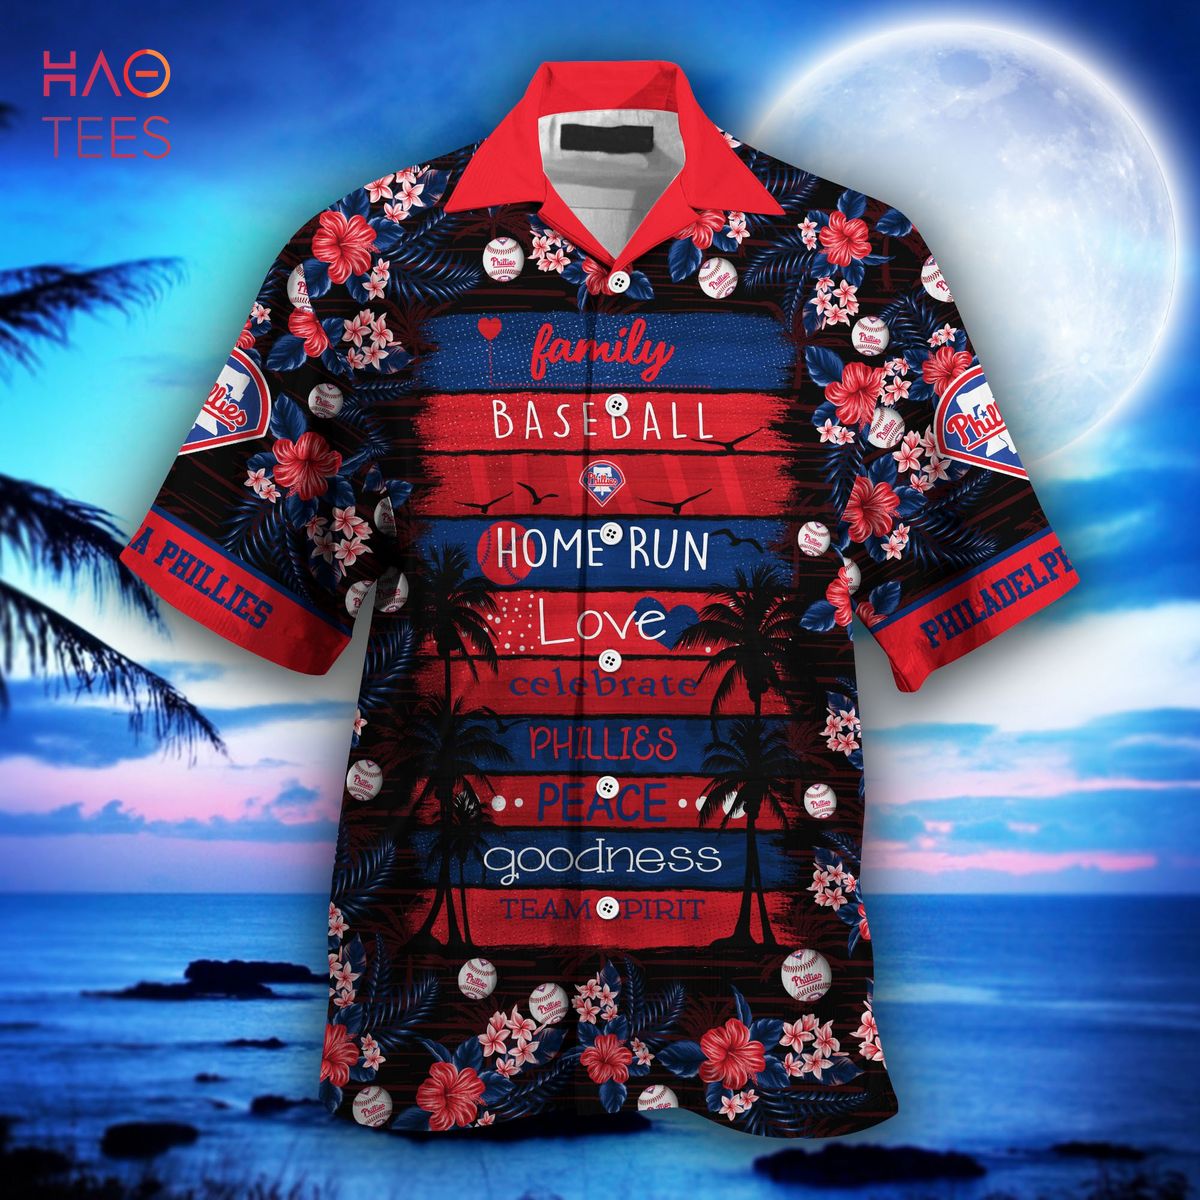 LIMITED] Philadelphia Phillies MLB-Summer Hawaiian Shirt And Shorts, Stress  Blessed Obsessed For Fans